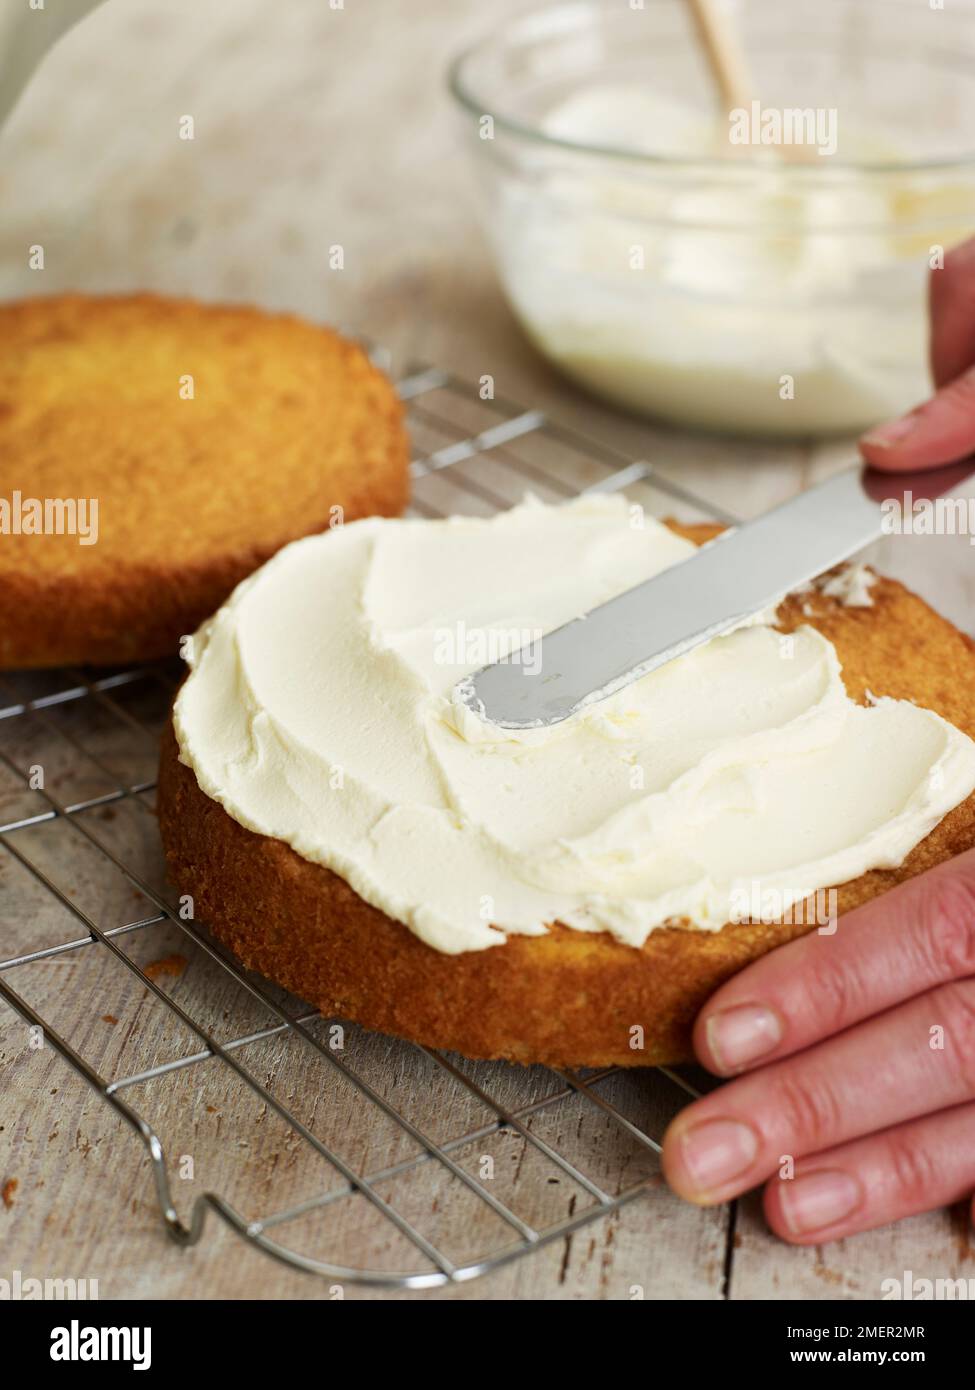 Spreading butter icing on Victoria sponge cake Stock Photo